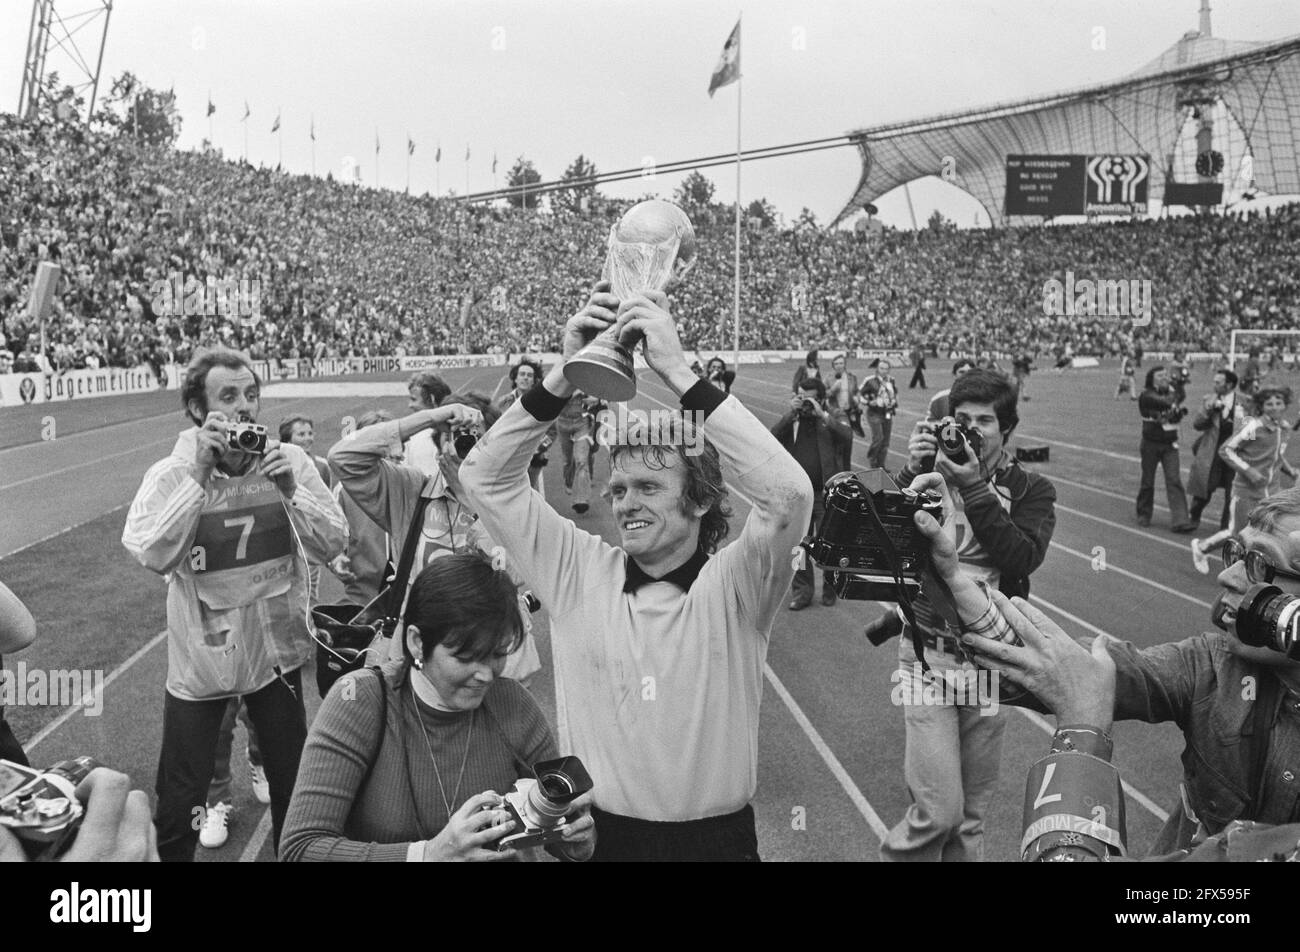 World Cup final 1974 in Munich, West Germany against the Netherlands 2-1; goalkeeper Sepp Maier with the cup, July 7, 1974, cups, finals, goalkeepers, sports, soccer, world championships, The Netherlands, 20th century press agency photo, news to remember, documentary, historic photography 1945-1990, visual stories, human history of the Twentieth Century, capturing moments in time Stock Photo